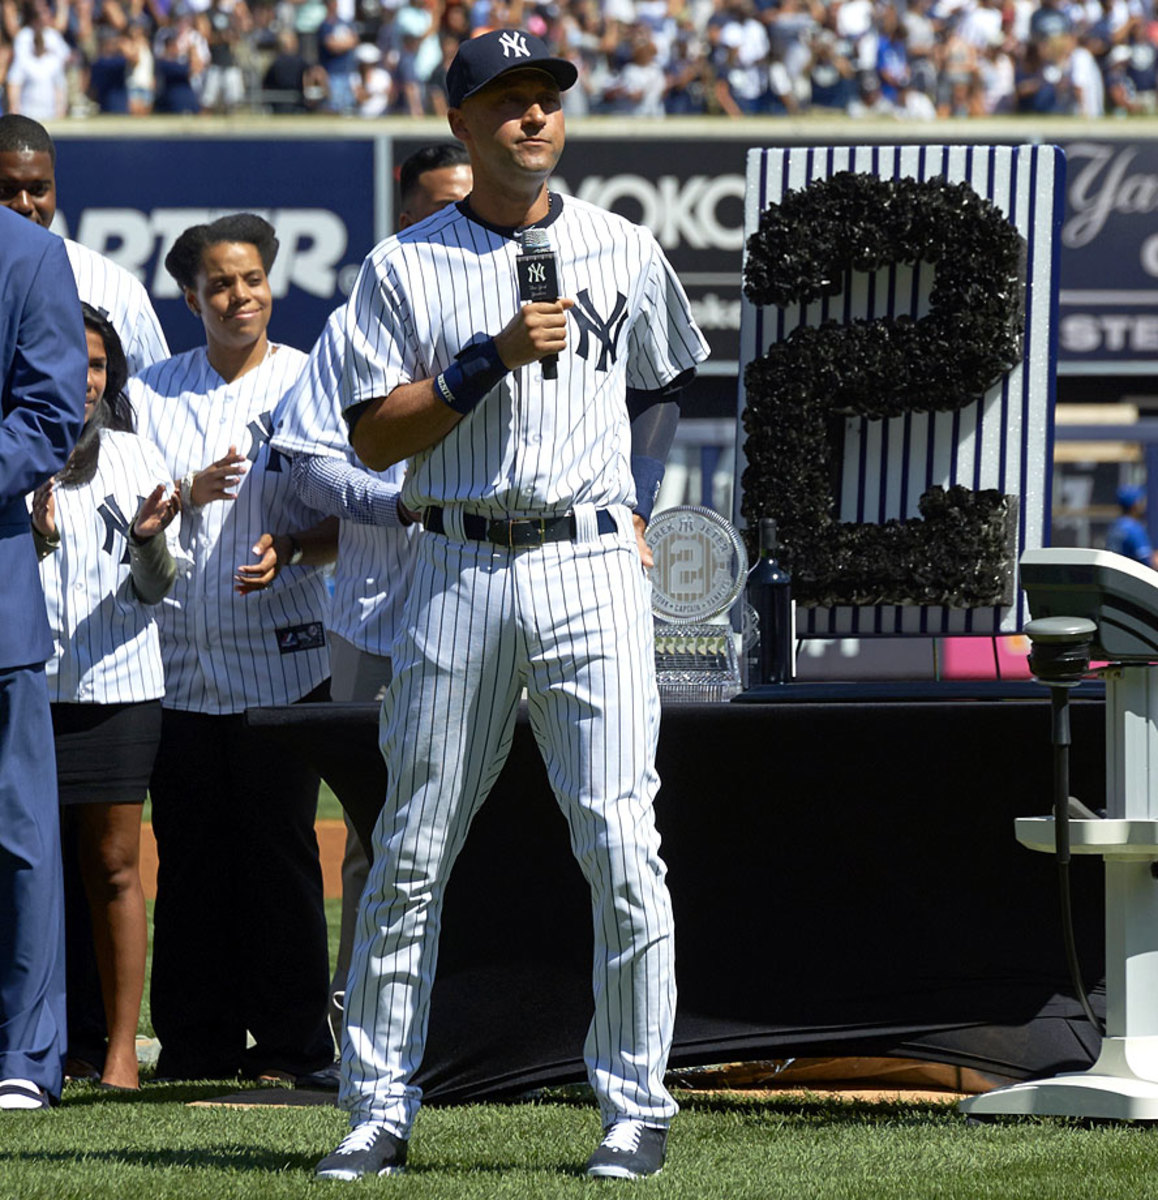 Yankees to wear uniform patches celebrating captain Jeter